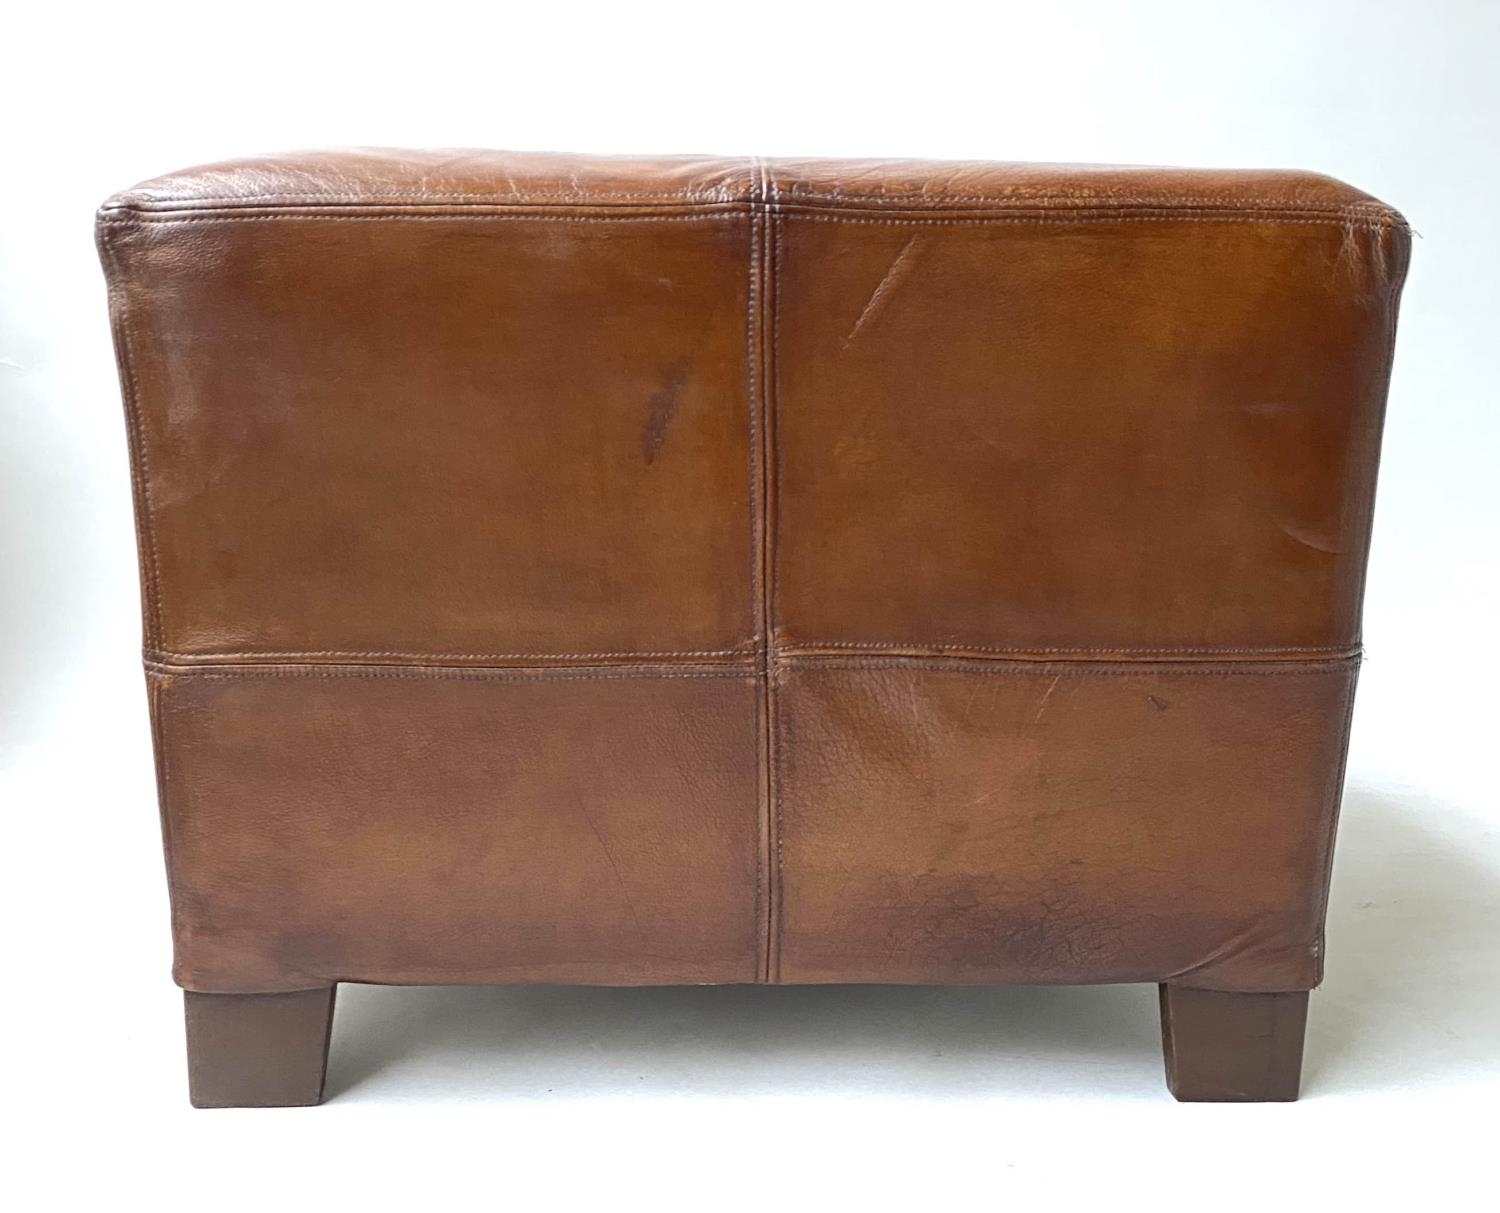 CENTRE STOOL, square stitched natural tan leather, 65cm x 65cm x 50cm H. - Image 5 of 6